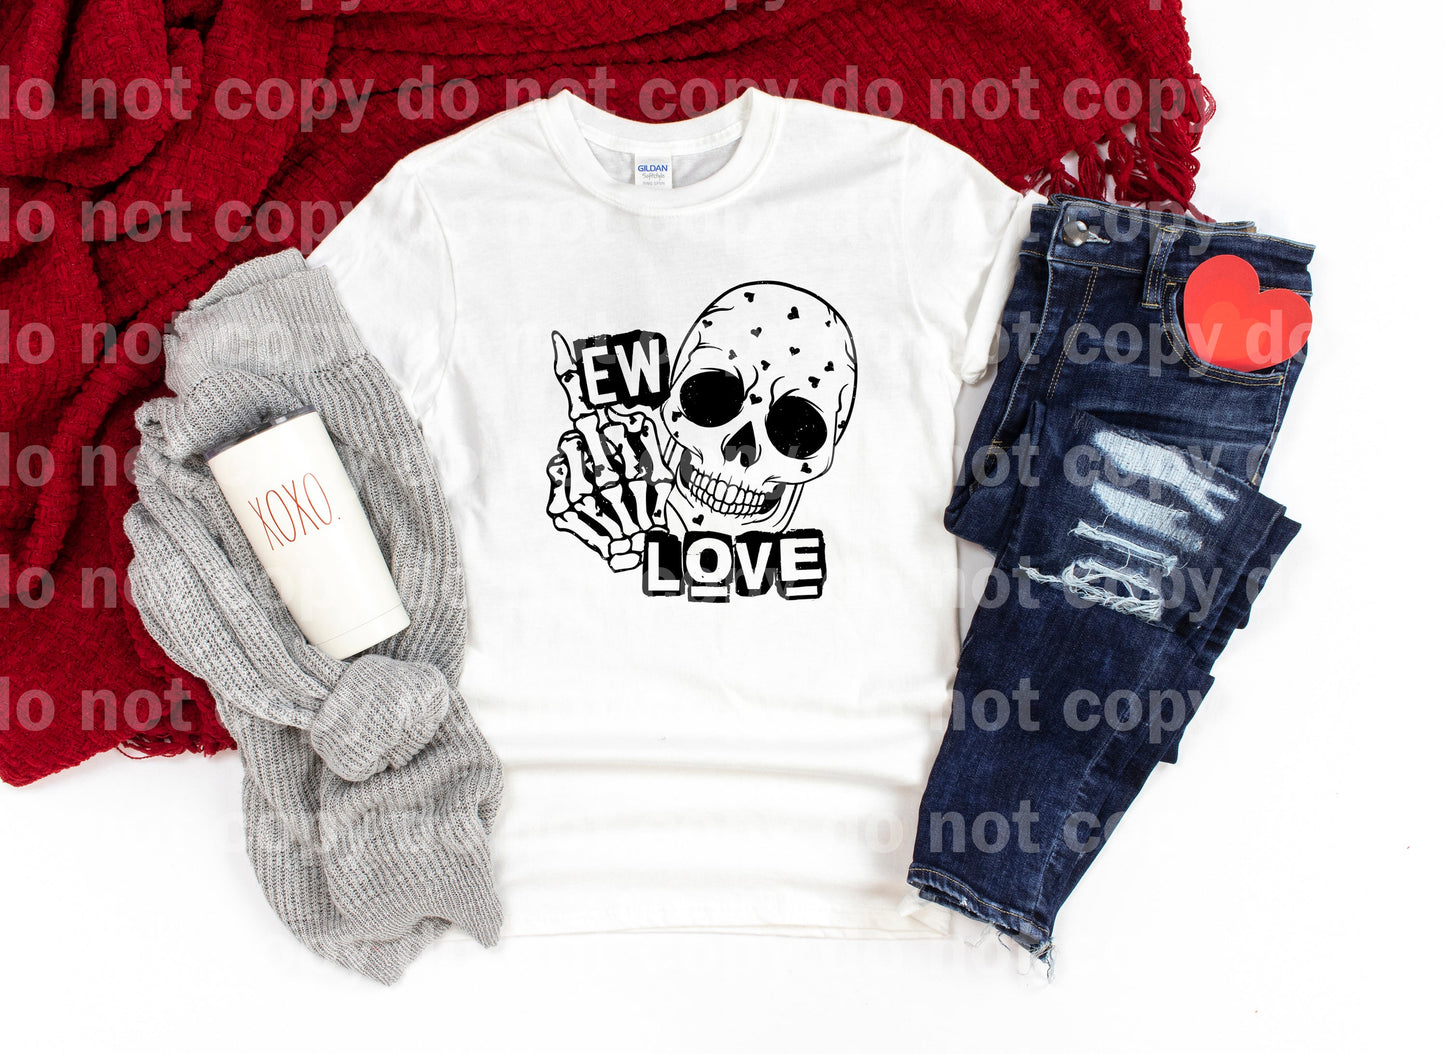 Ew Love Skull Full Color/One Color Dream Print or Sublimation Print